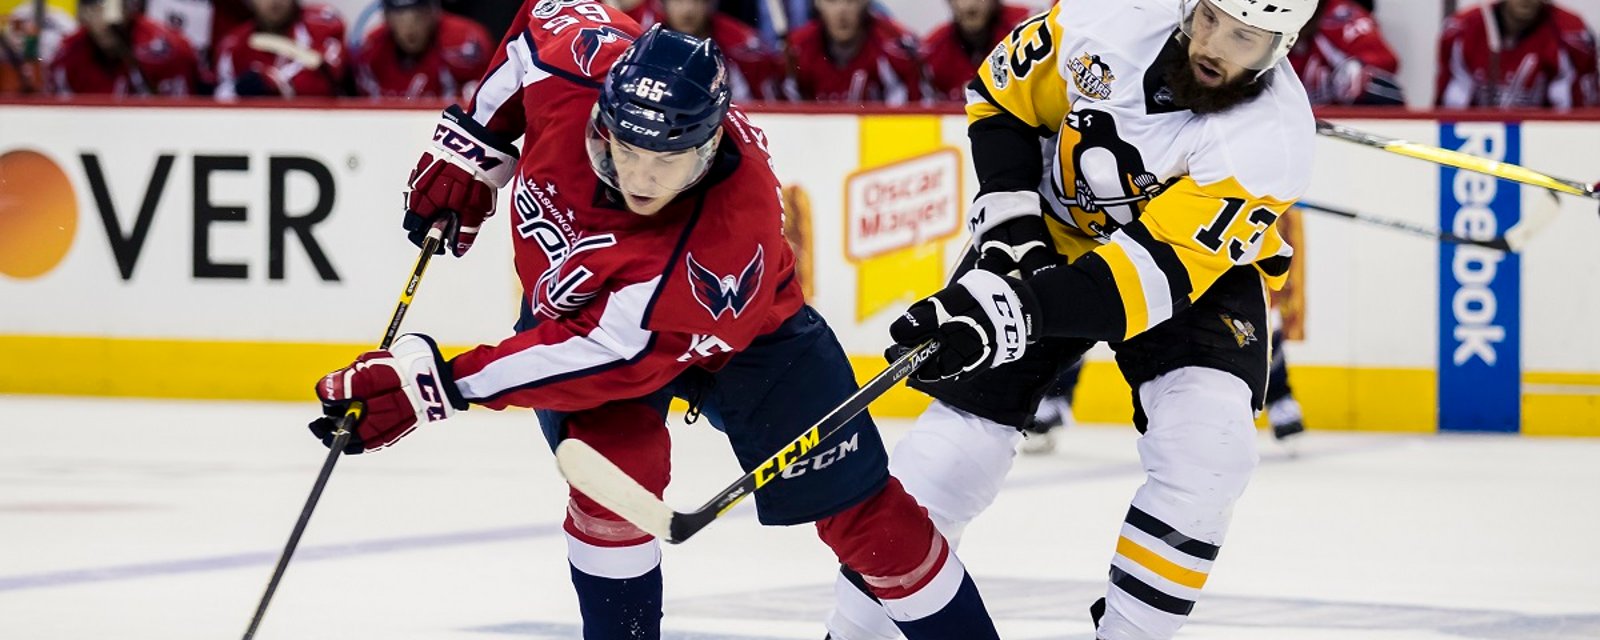 Breaking: Capitals sign former first round pick to multi-year deal.